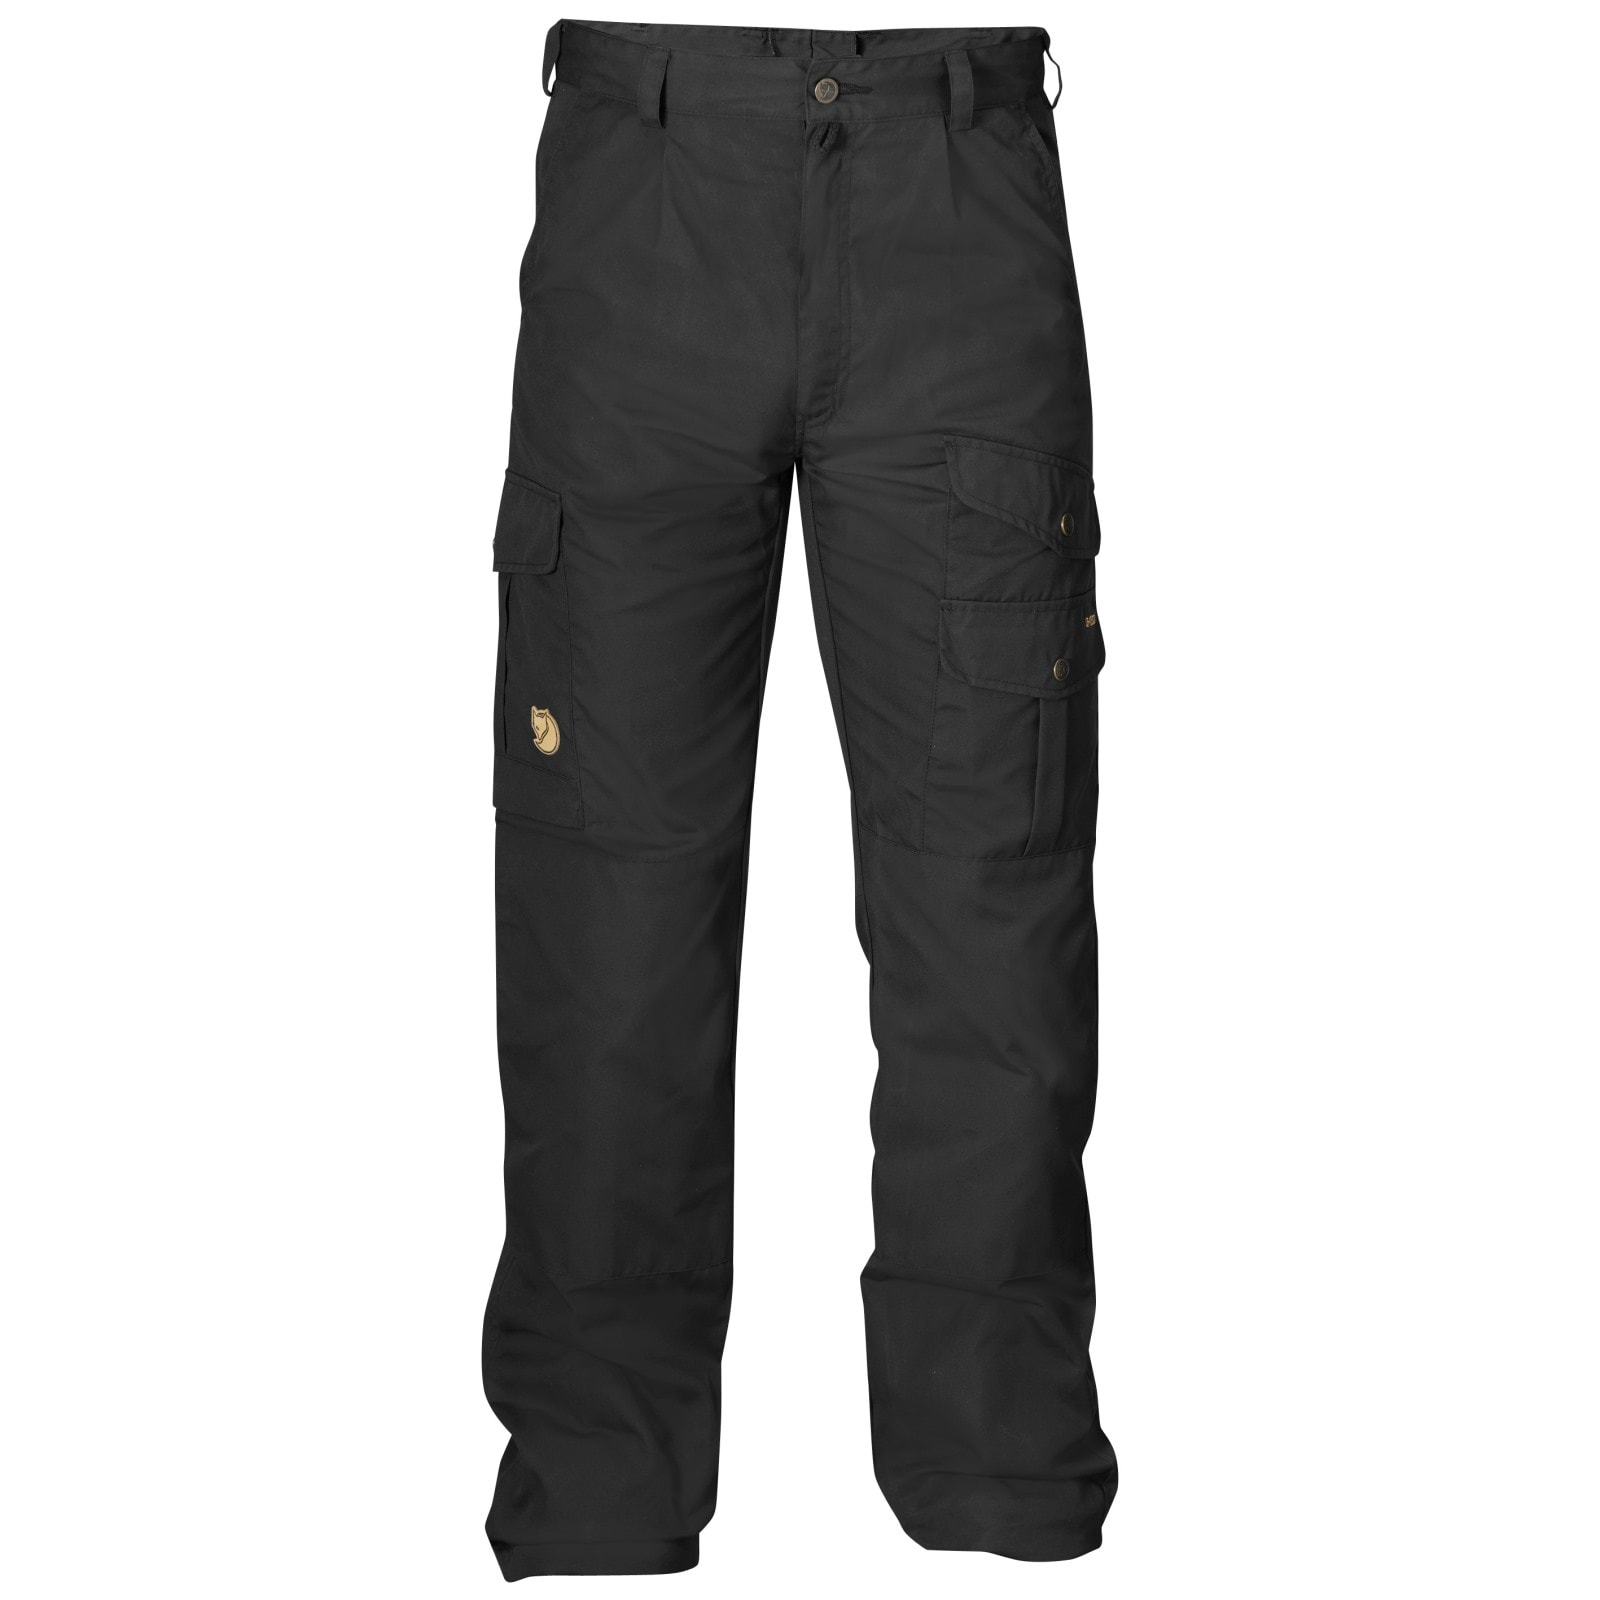 Buy Fjällräven Iceland Trouser from Outnorth